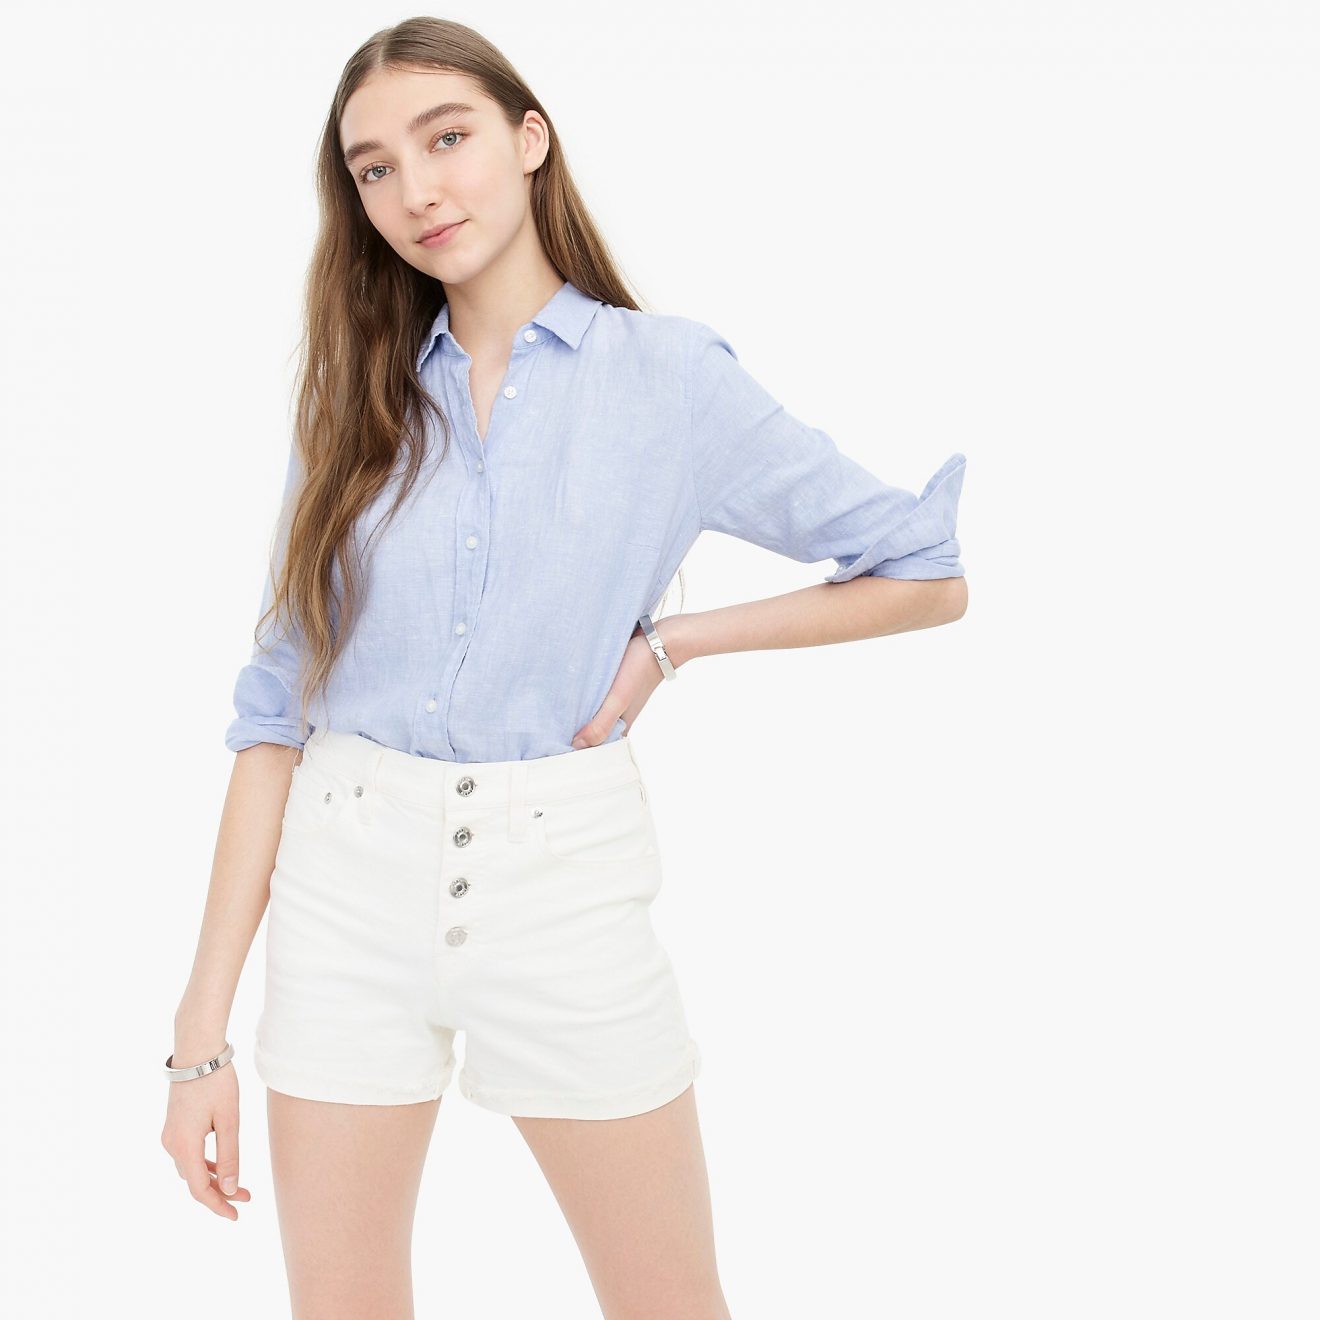 J. Crew High-rise denim short in white with button fly